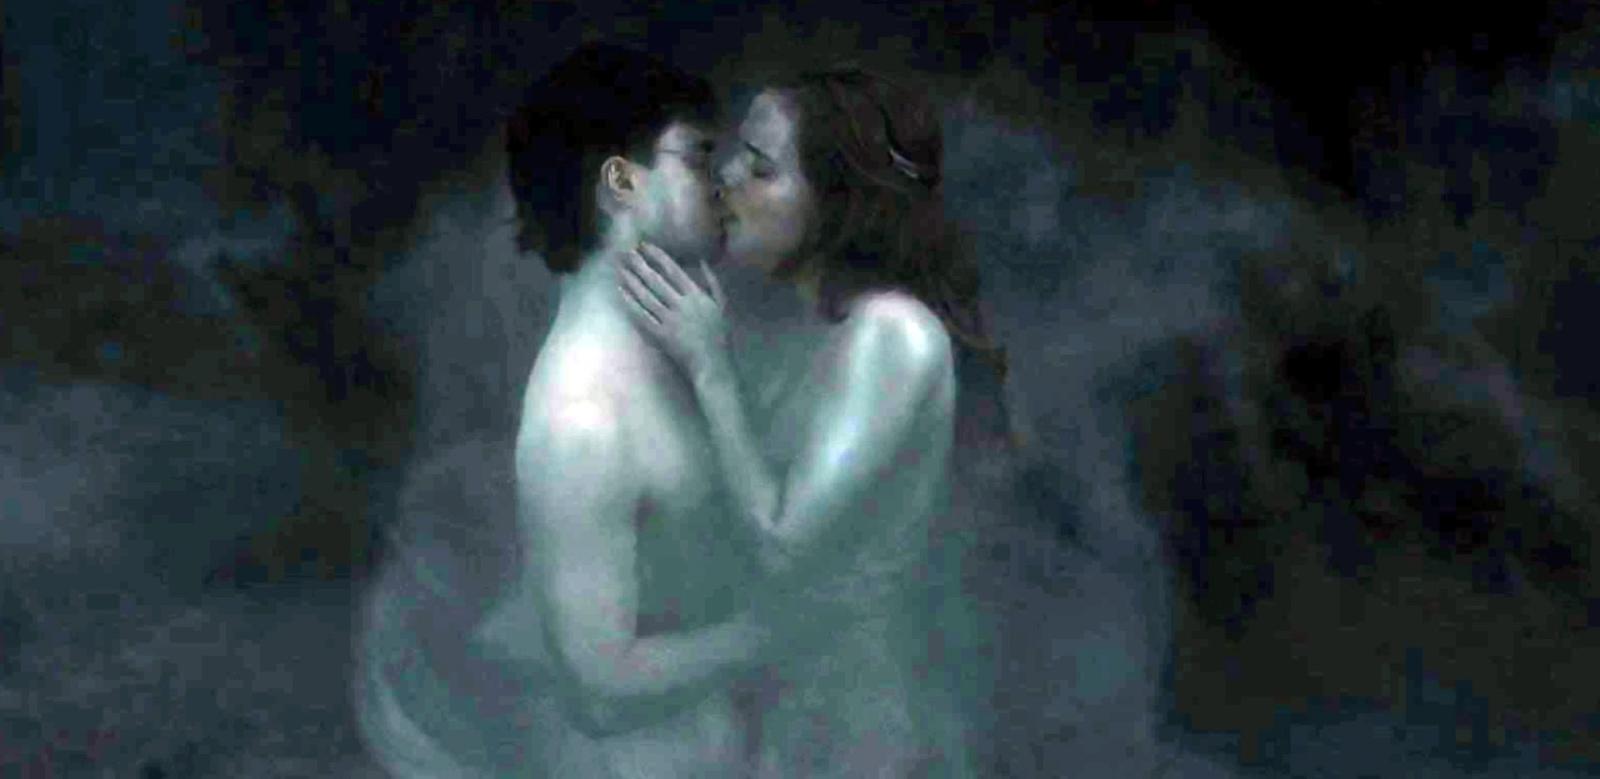 Harry & Hermione "Nude" Scene Was Controversial Before Deathly Hallows Even Premiered - image 1